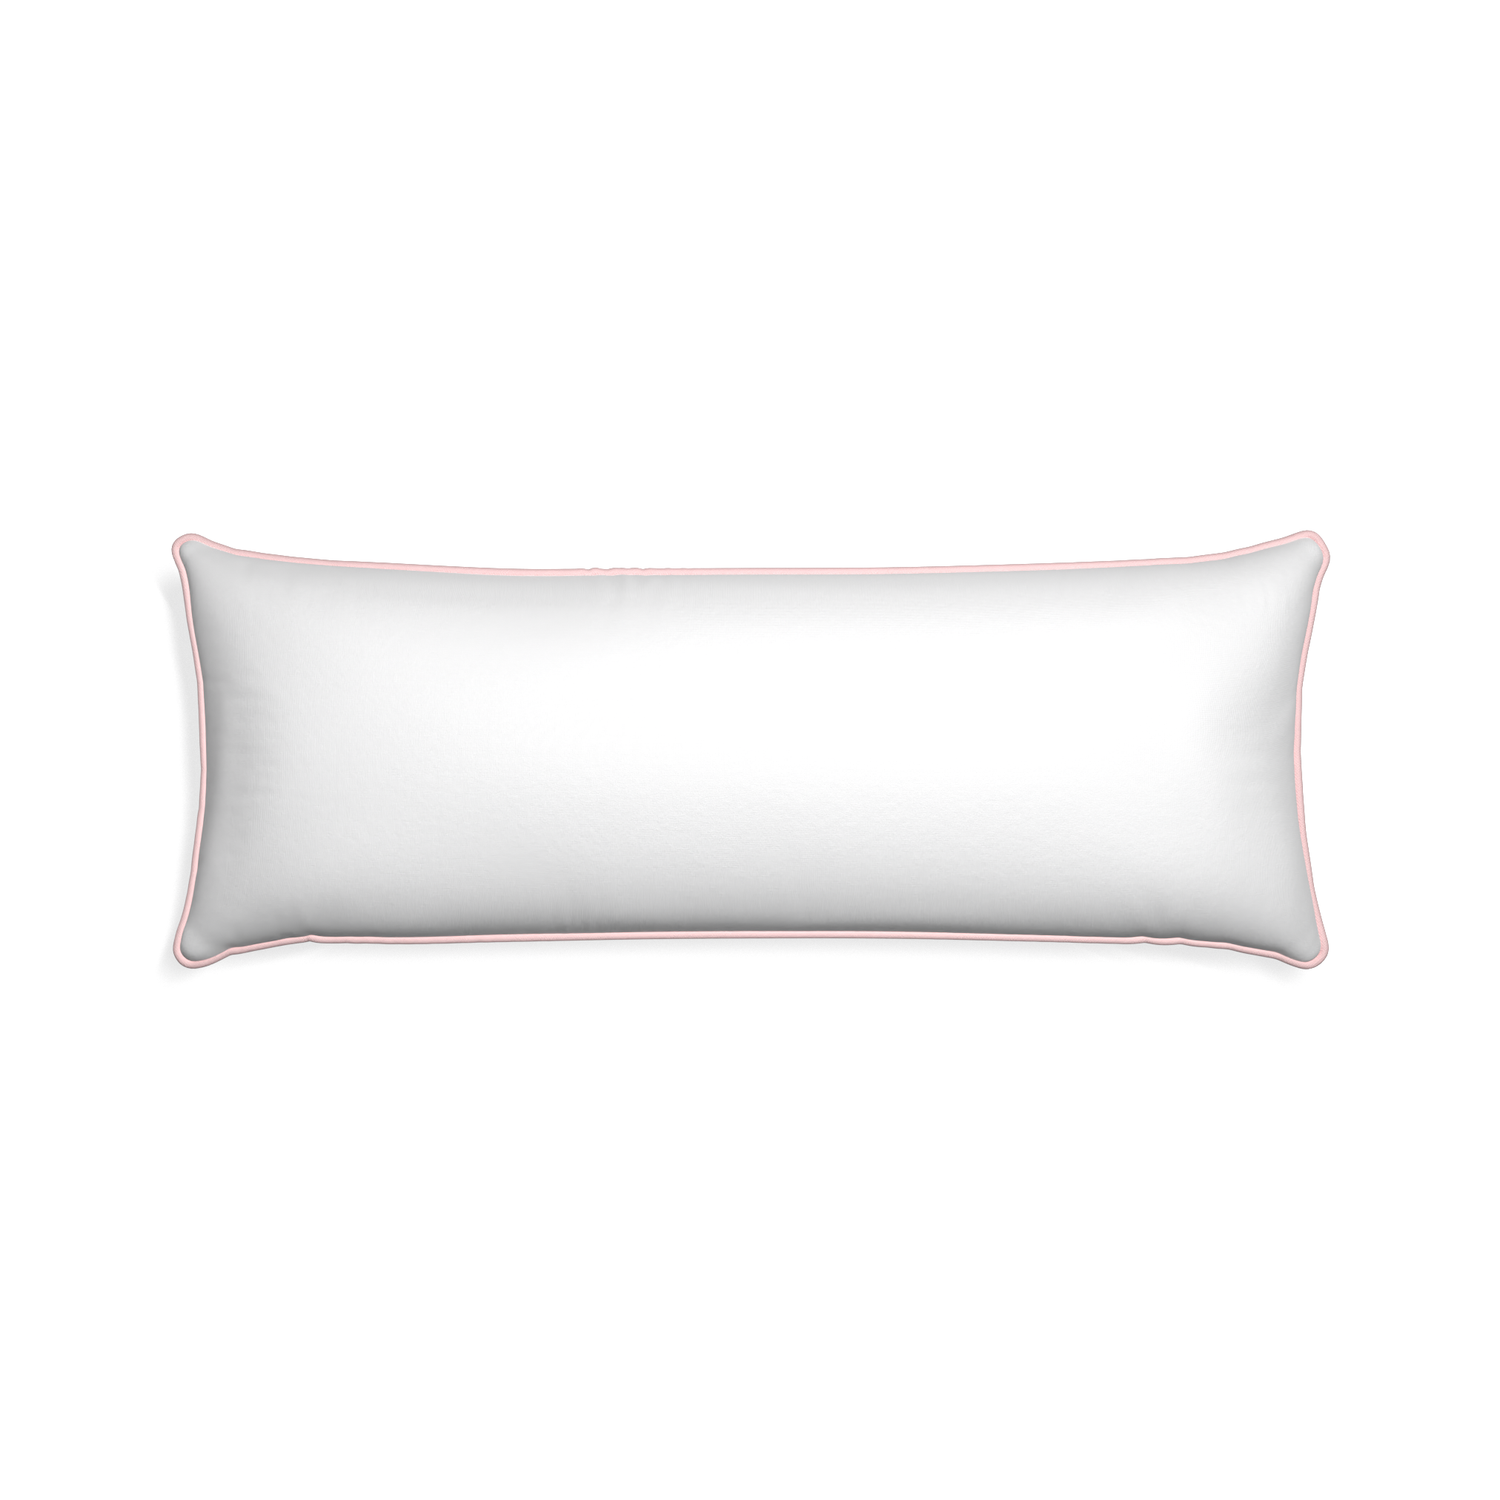 Xl-lumbar snow custom white cottonpillow with petal piping on white background